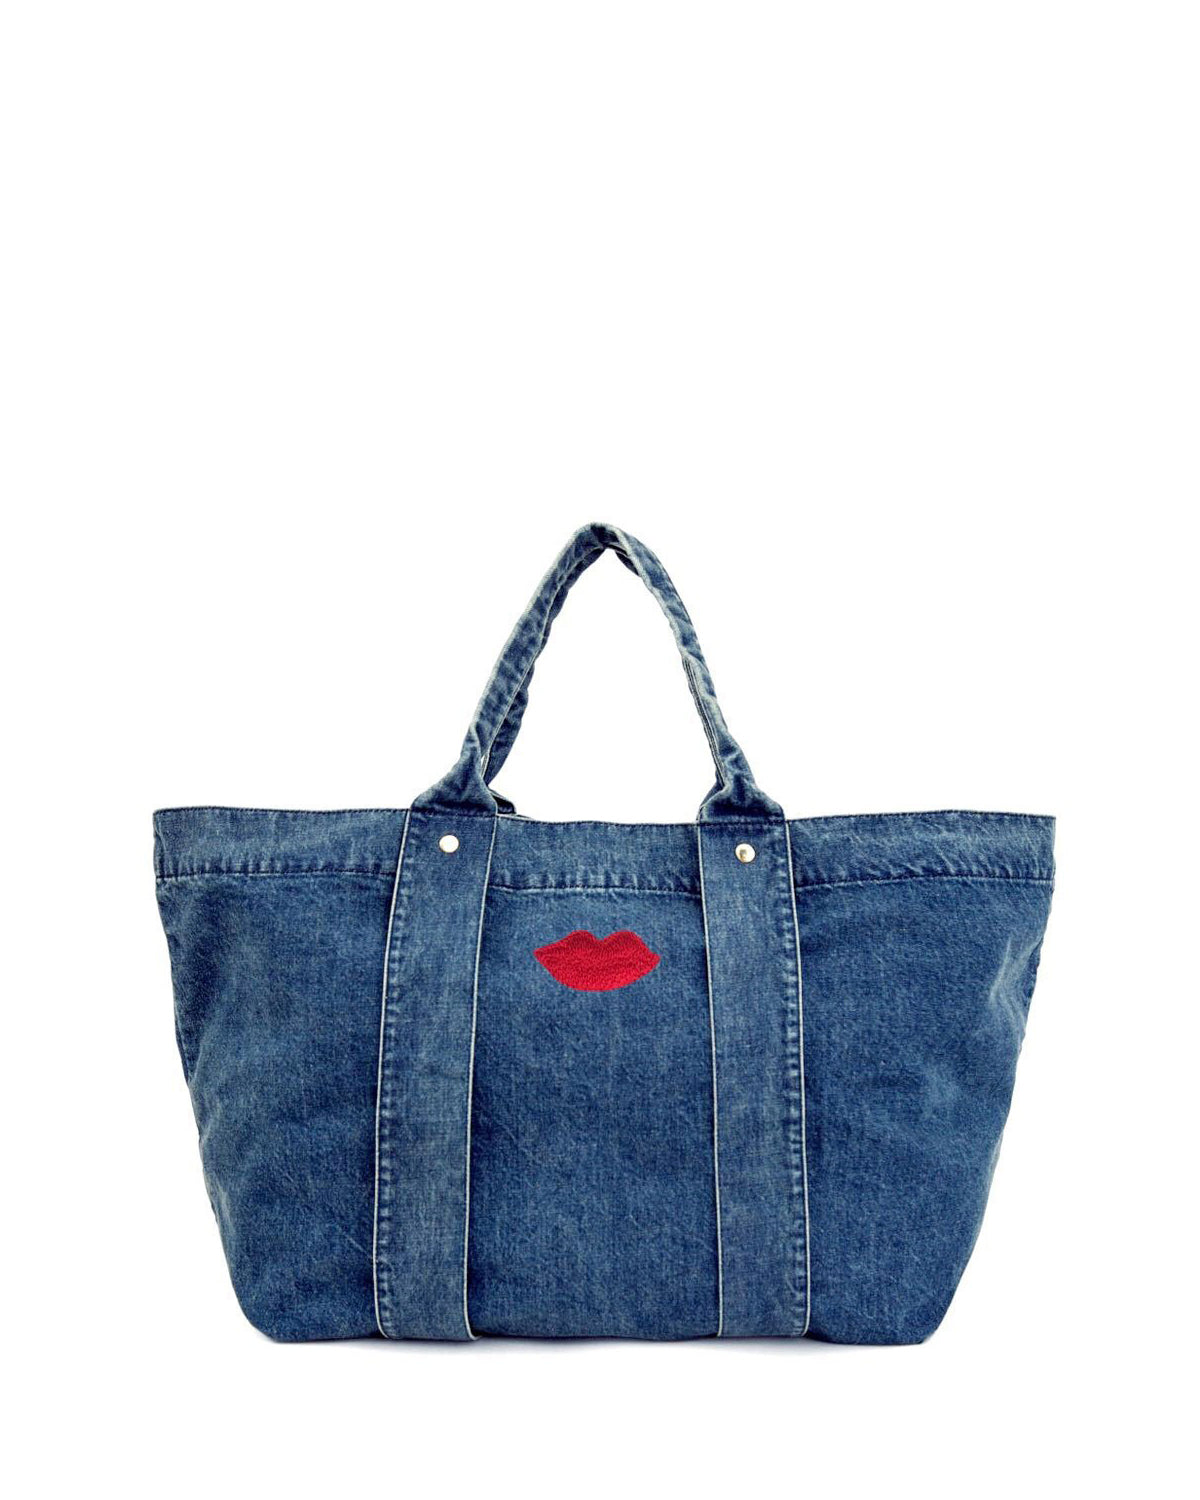 Giant Denim Trope with Red Lips Embroidered On The Top Center